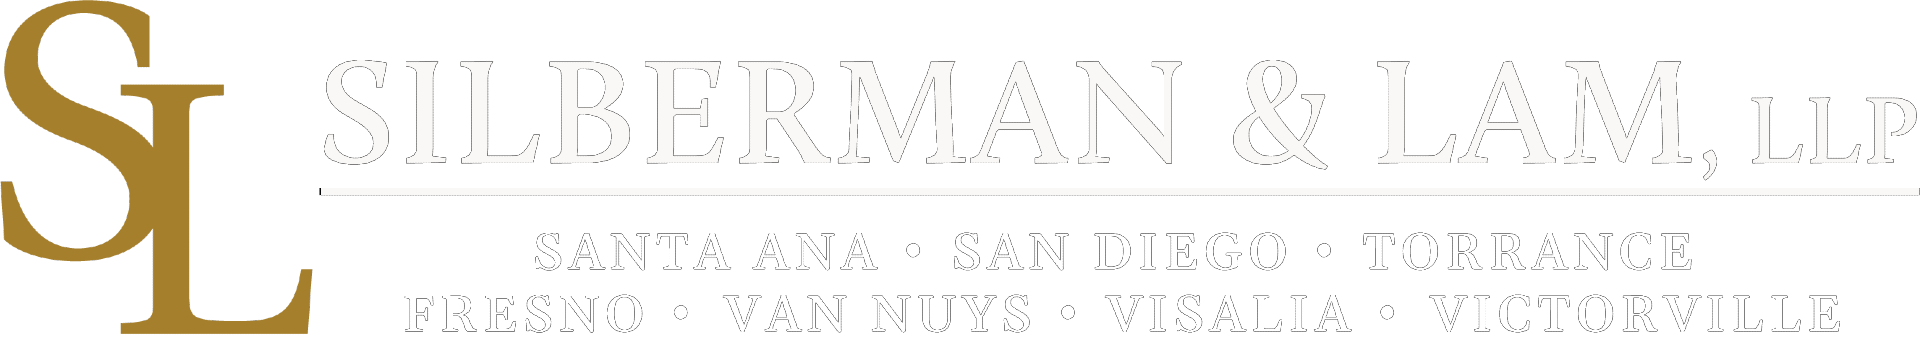 Silberman & Lam, LLP | Your Go-To Workers' Compensation Lawyers – Silberman & Lam, LLP